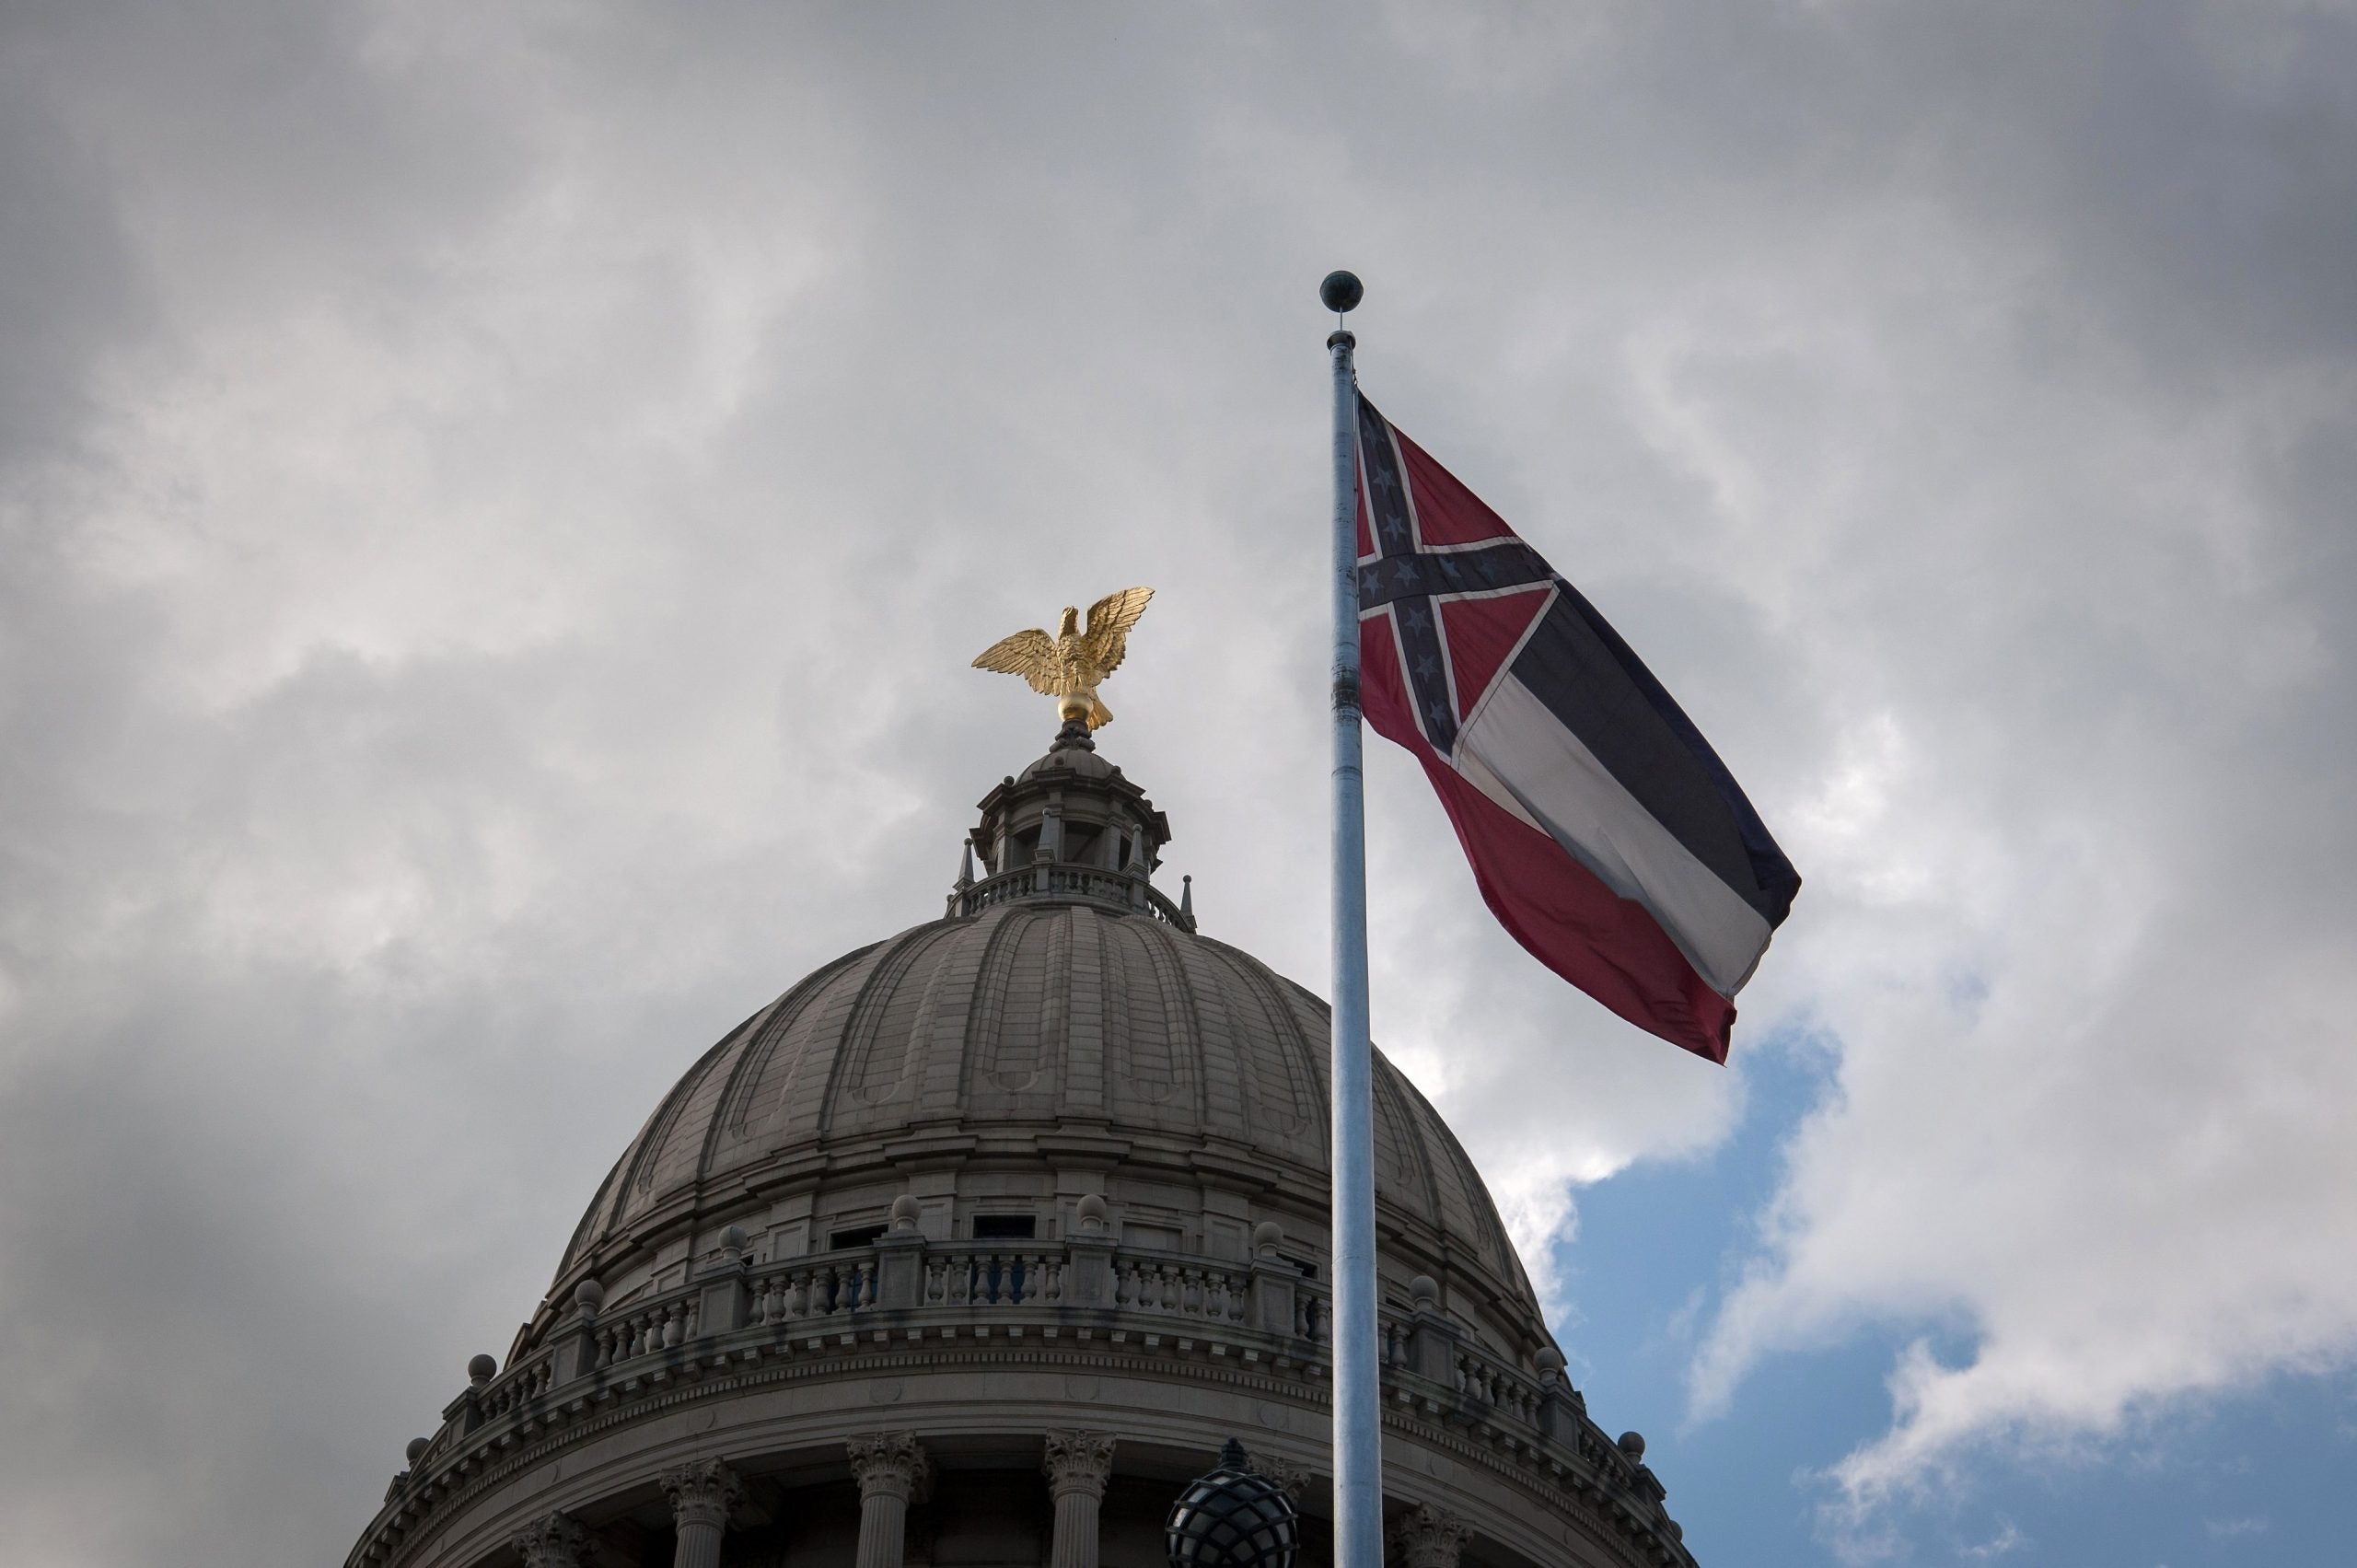 Decision To Remove Confederate Emblem From State Flag Brings Range Of Emotions For Black Mississippians